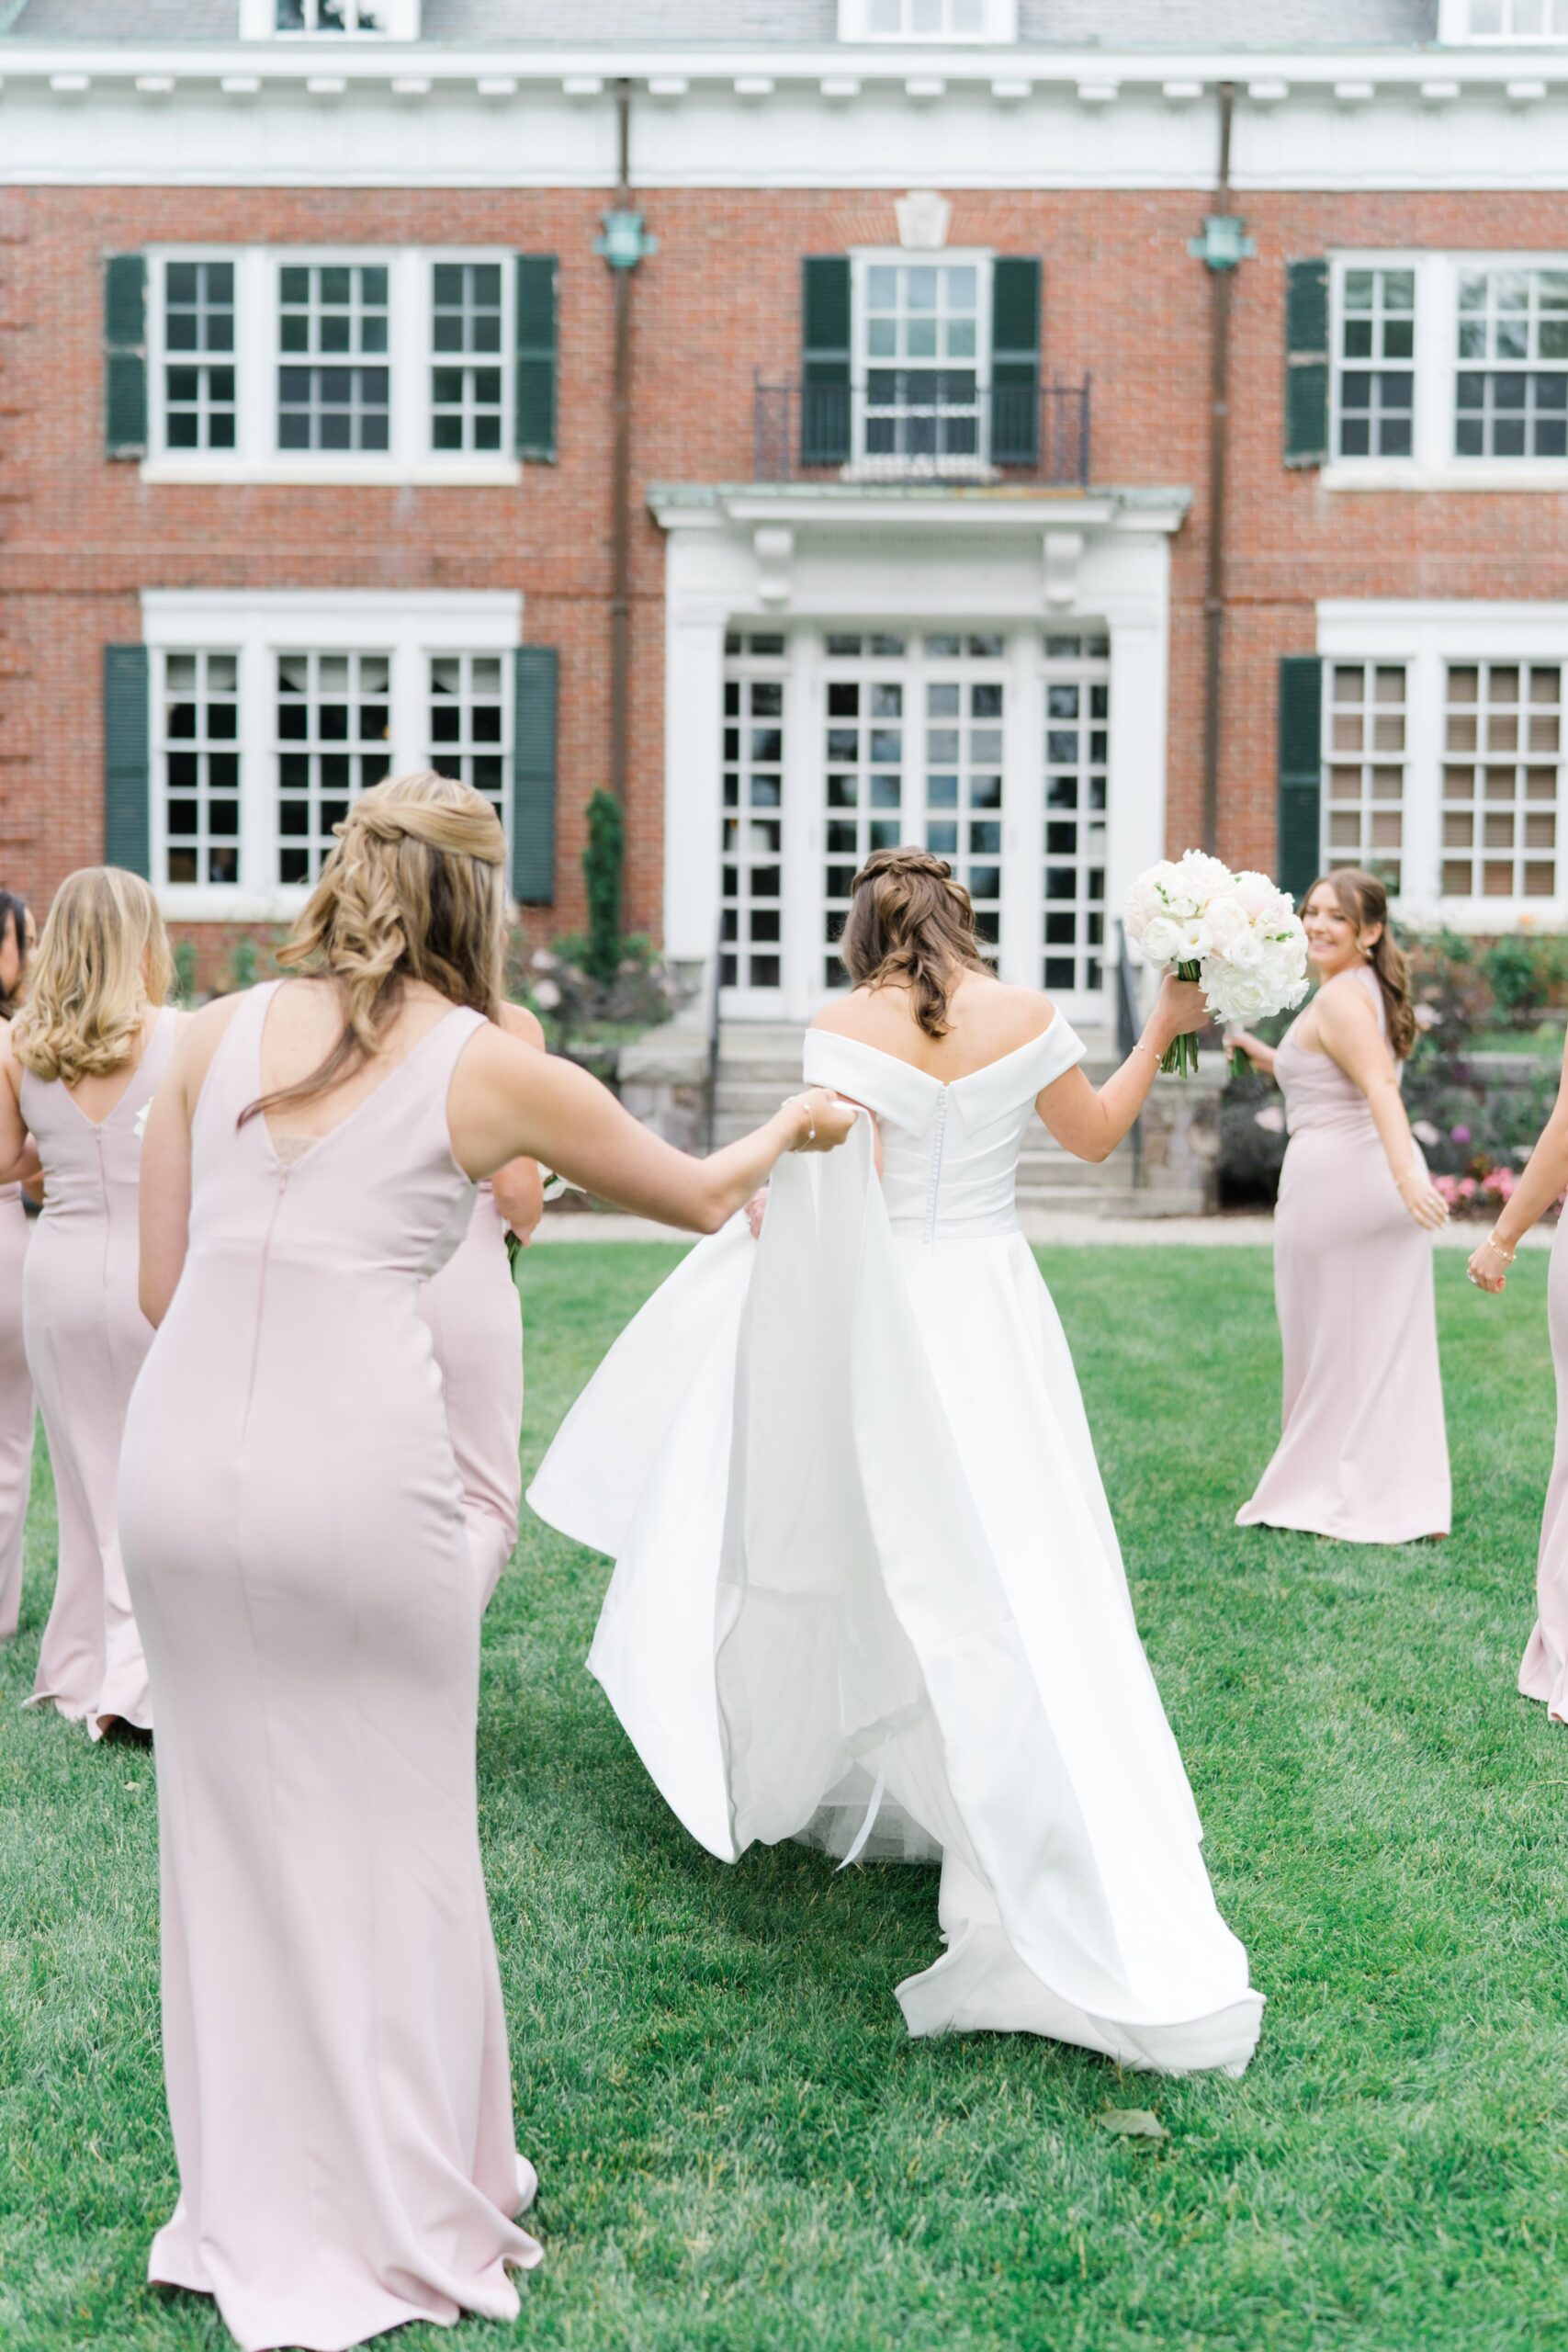 Maid of honor helps bride with dress while walking on the lawn.